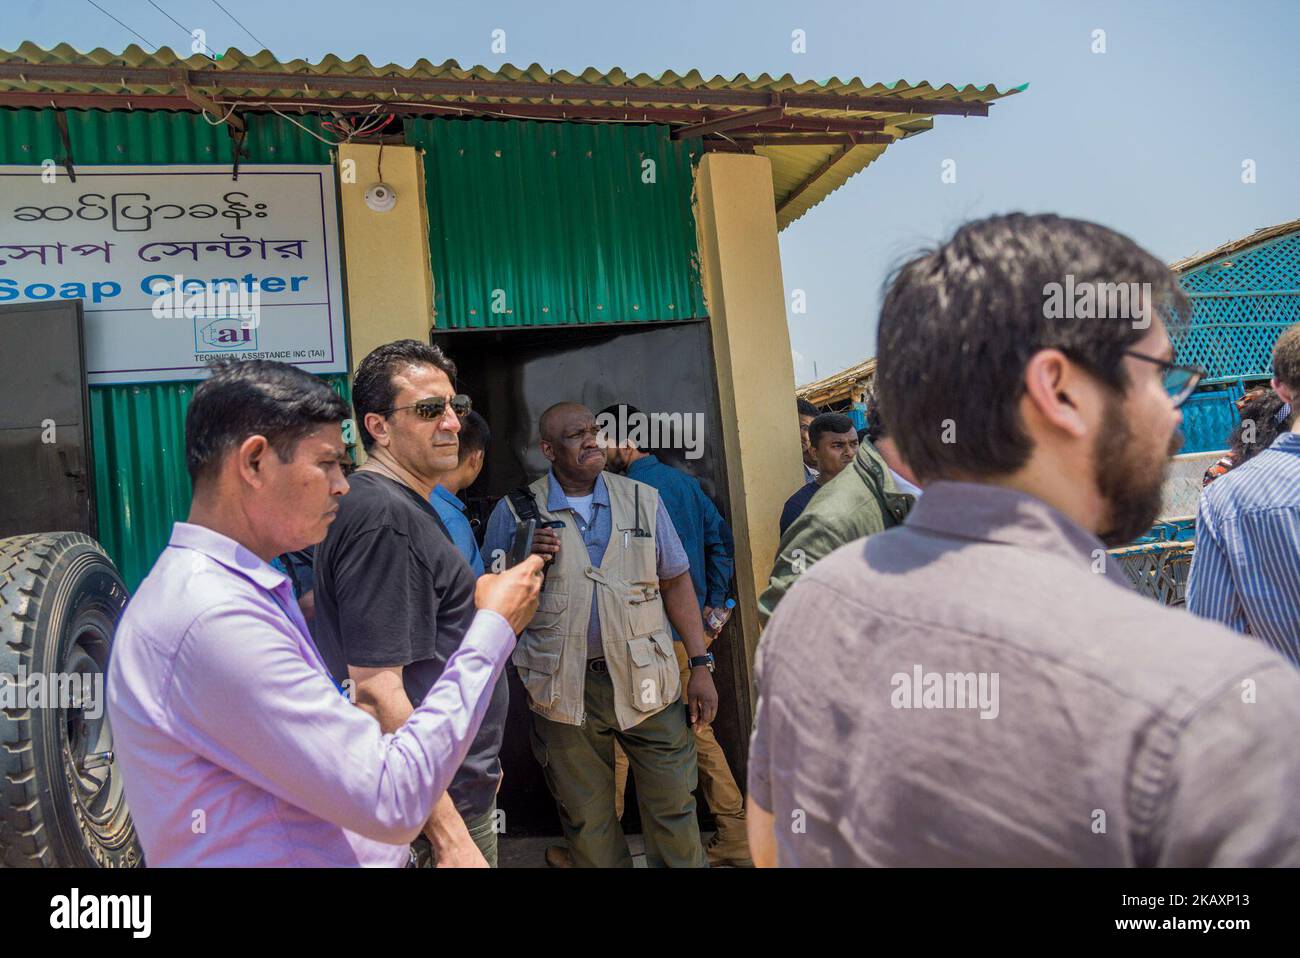 A member of UN security council reached at Cox's Bazar in Bangladesh to visit Rohingya camp on 29 April, 2018. UN Security Council team went to Kutupalong camp to meet Rohingya refugees in Bangladesh. A UN Security Council delegation is in Bangladesh for a firsthand look at the plight of some 700,000 Rohingya Muslims who have fled Myanmar to escape military-led violence and are seeking UN protection to return home. (Photo by Masfiqur Sohan/NurPhoto) Stock Photo